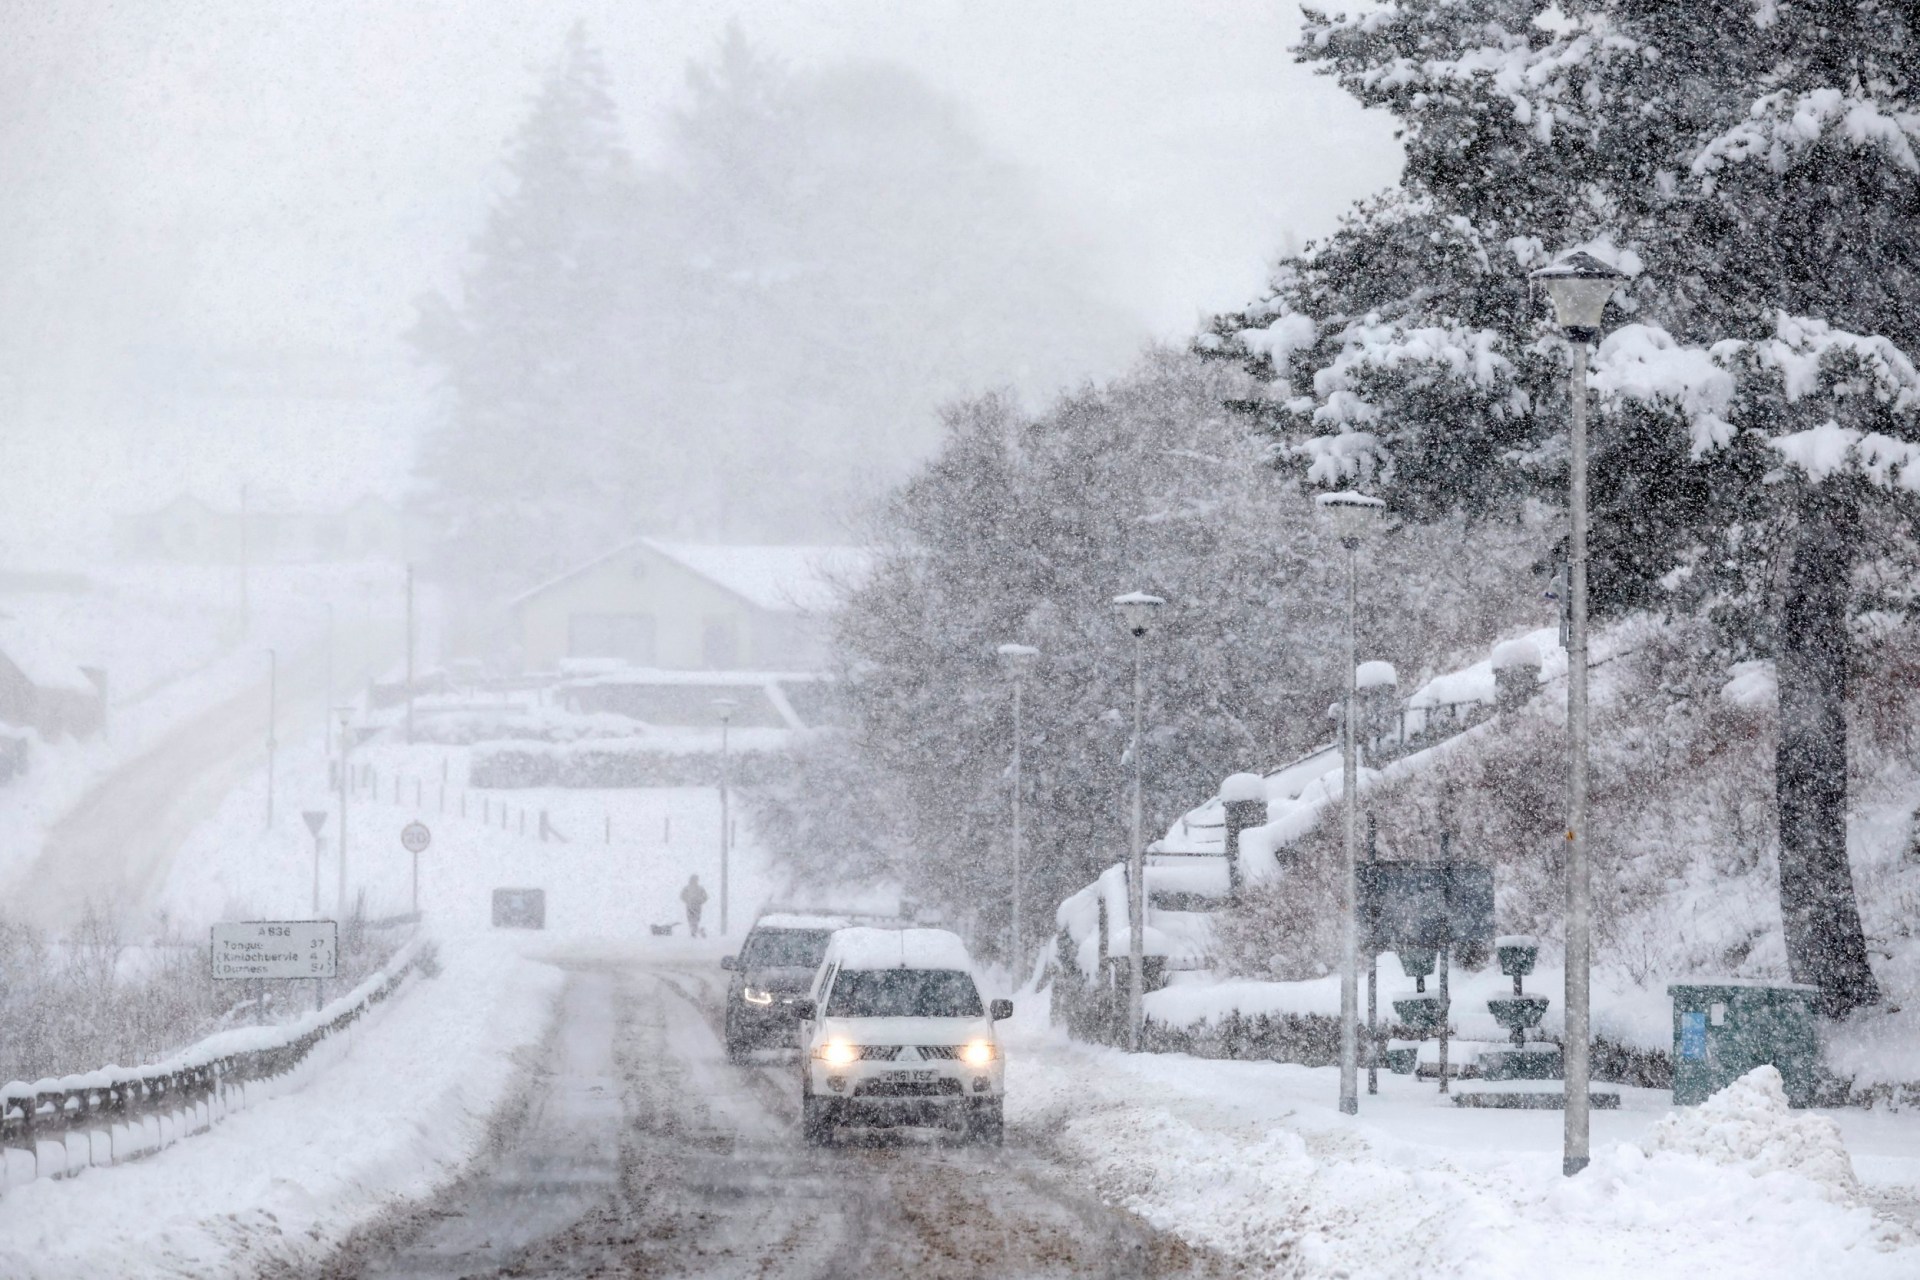 met office gives verdict on if there's more snow to come